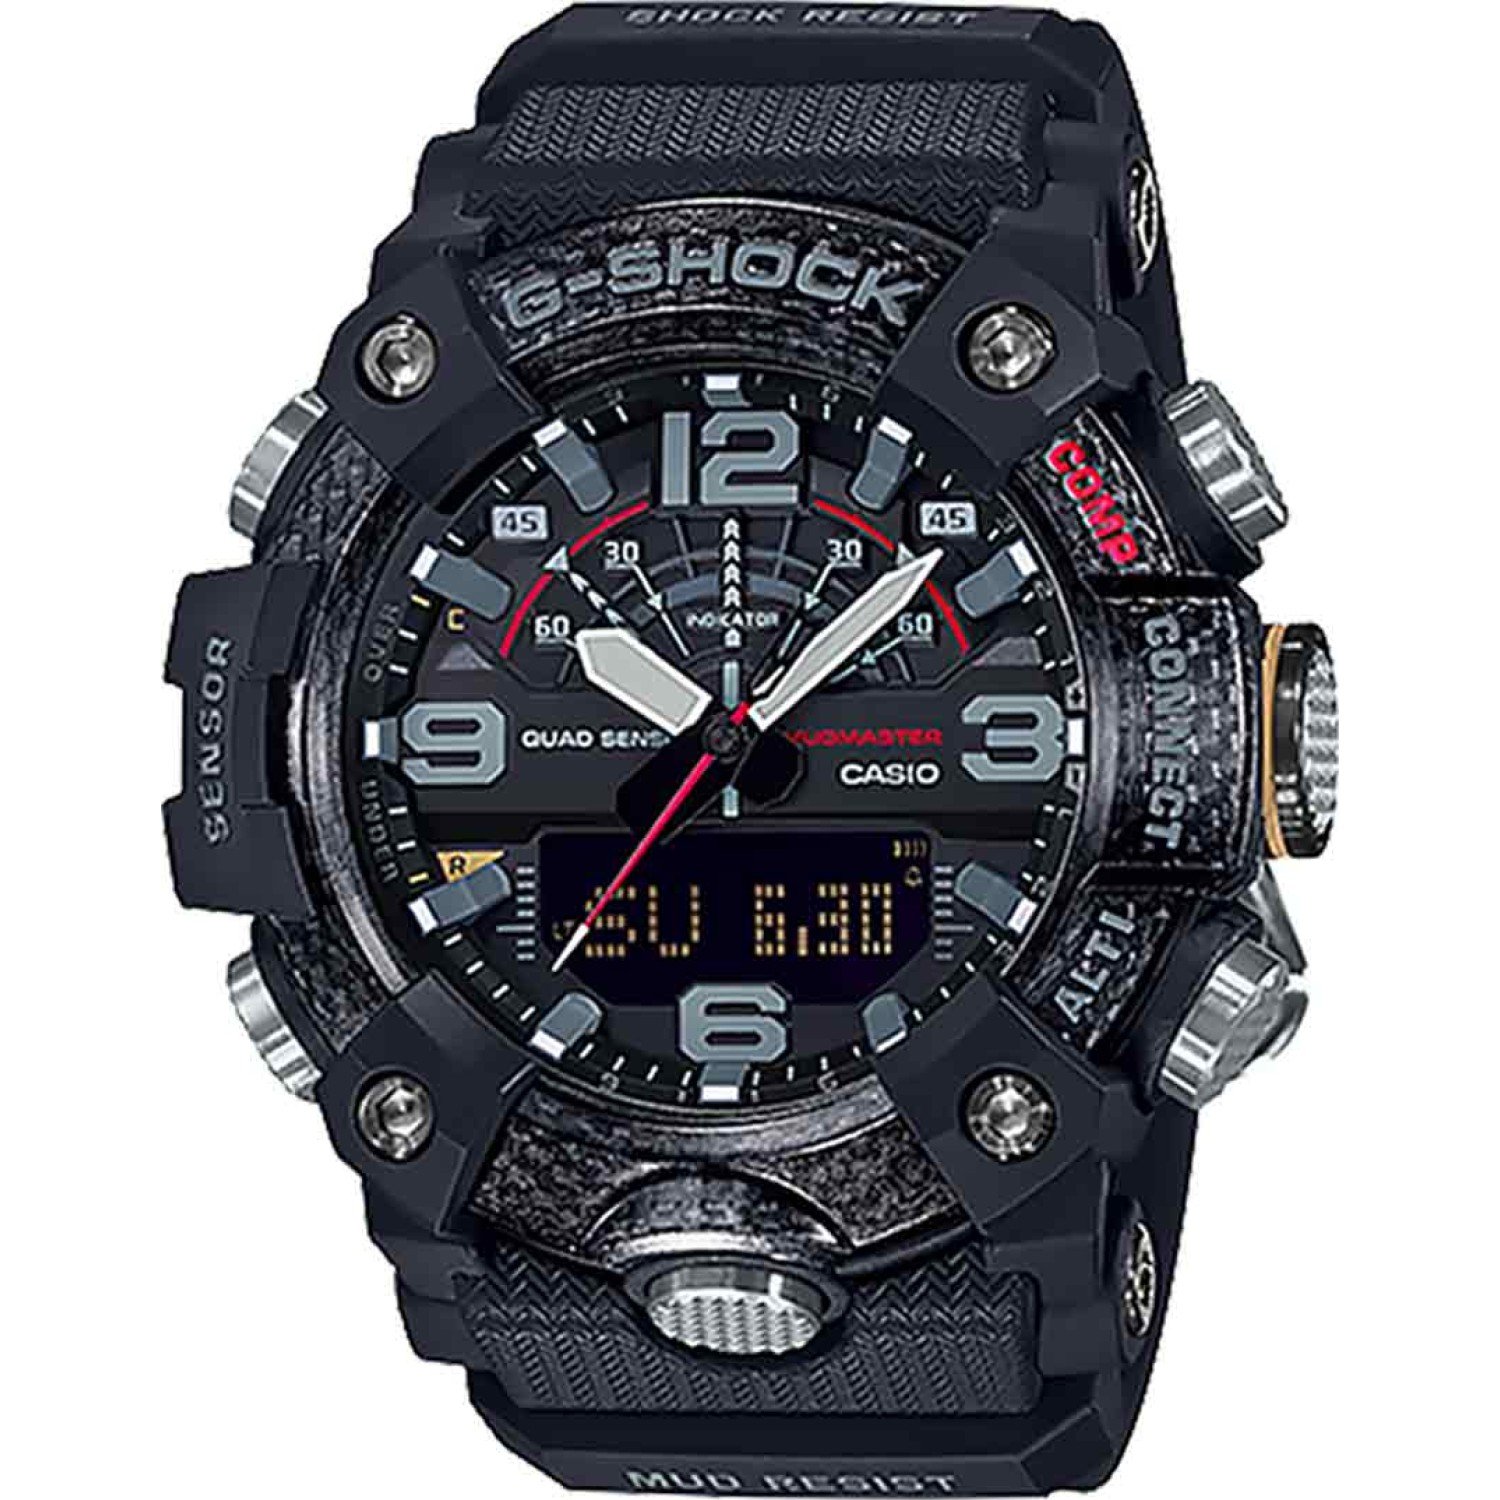 GGB100-1A G-SHOCK Mudmaster Master of G Series. From the MASTER OF G Series MUDMASTER, the watch that is designed and engineered to withstand rough land environments, come carbon resin models that incorporate a new type of structure. The case is made of h